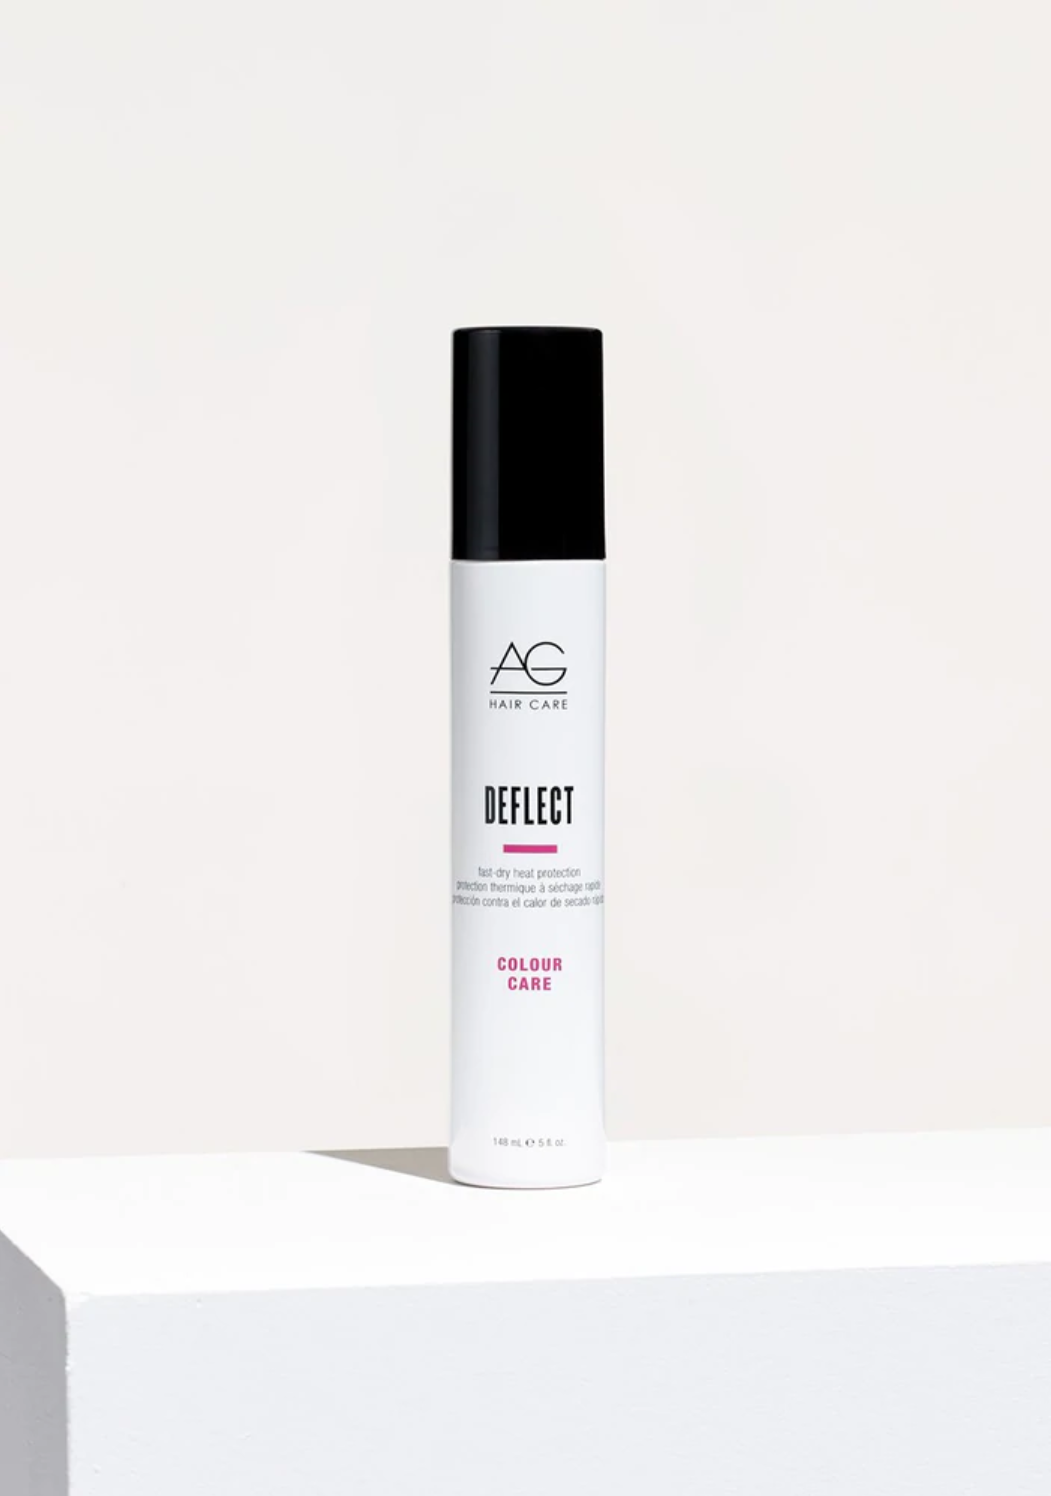 Deflect Fast dry heat protection 5oz - Give Your Hair a Kiss